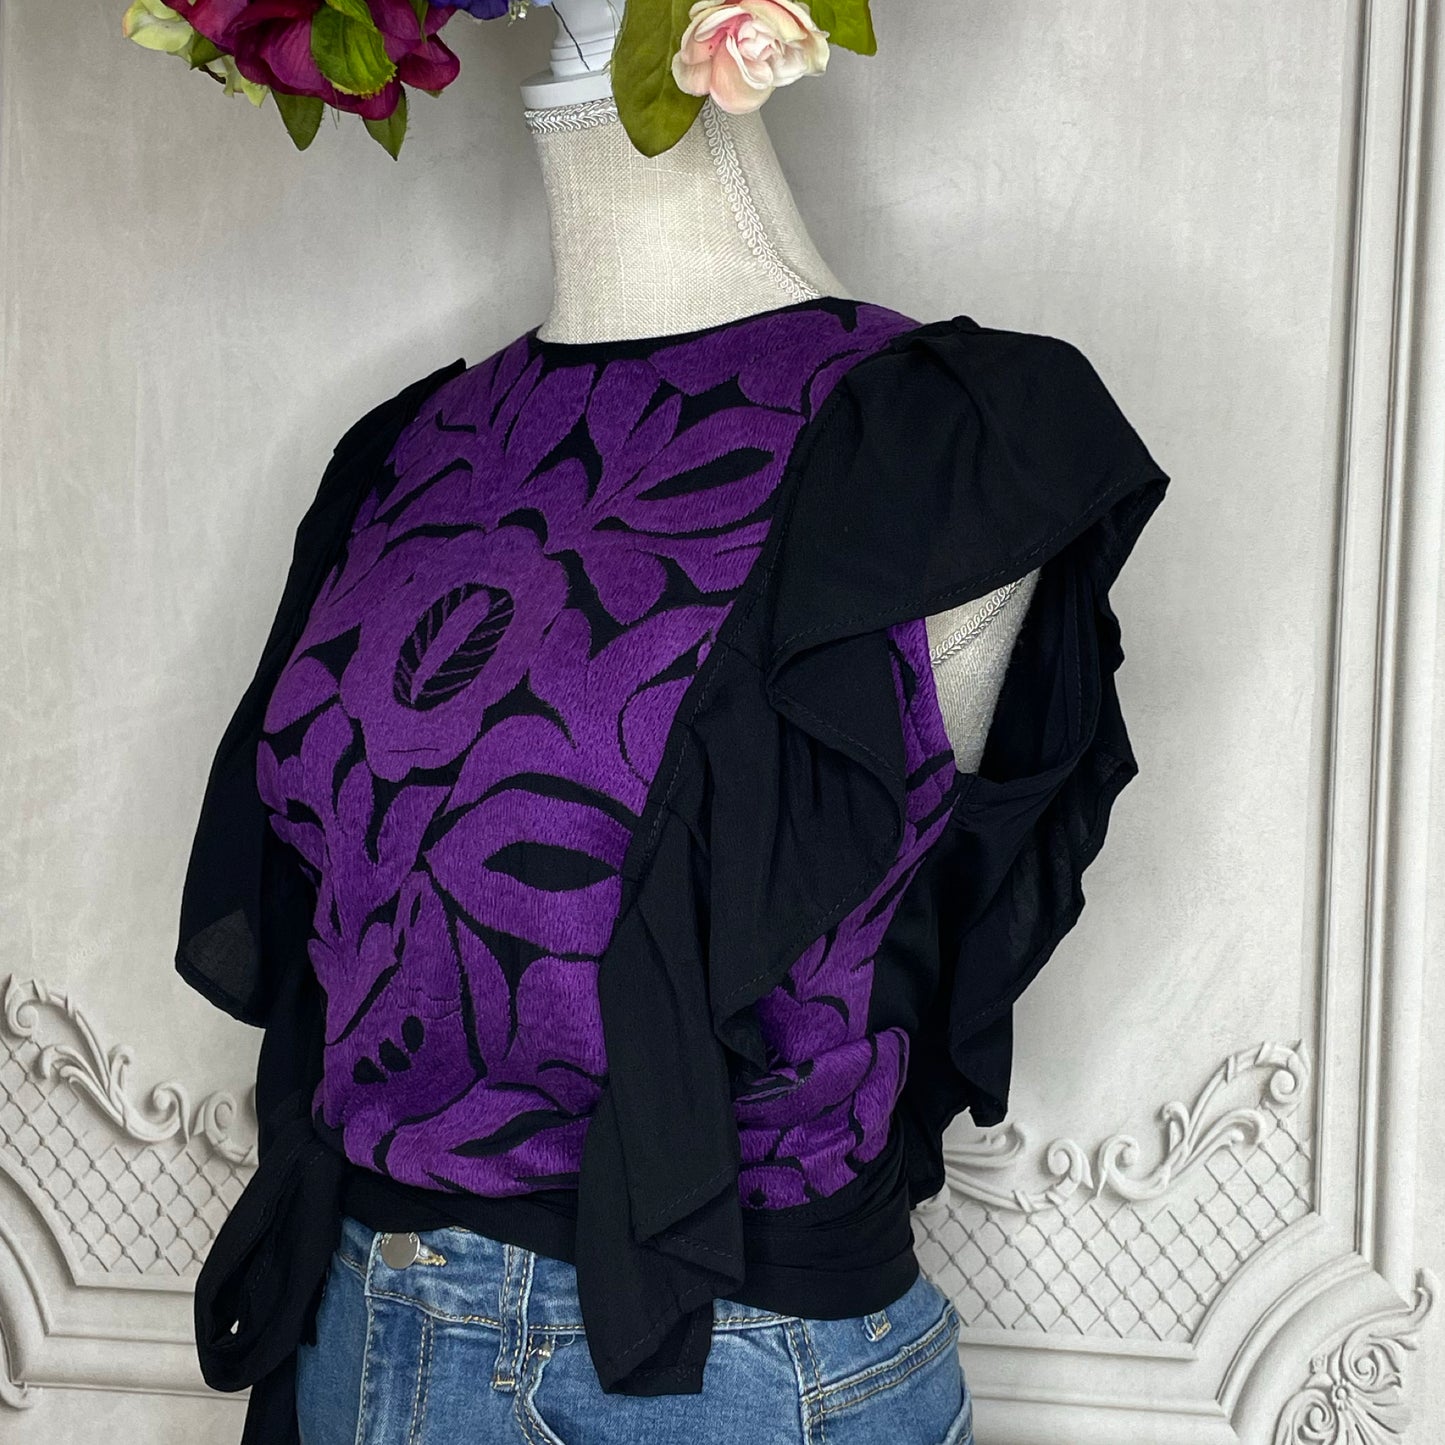 Jalapa Mexican Blouse - Butterfly Sleeve Tie Back